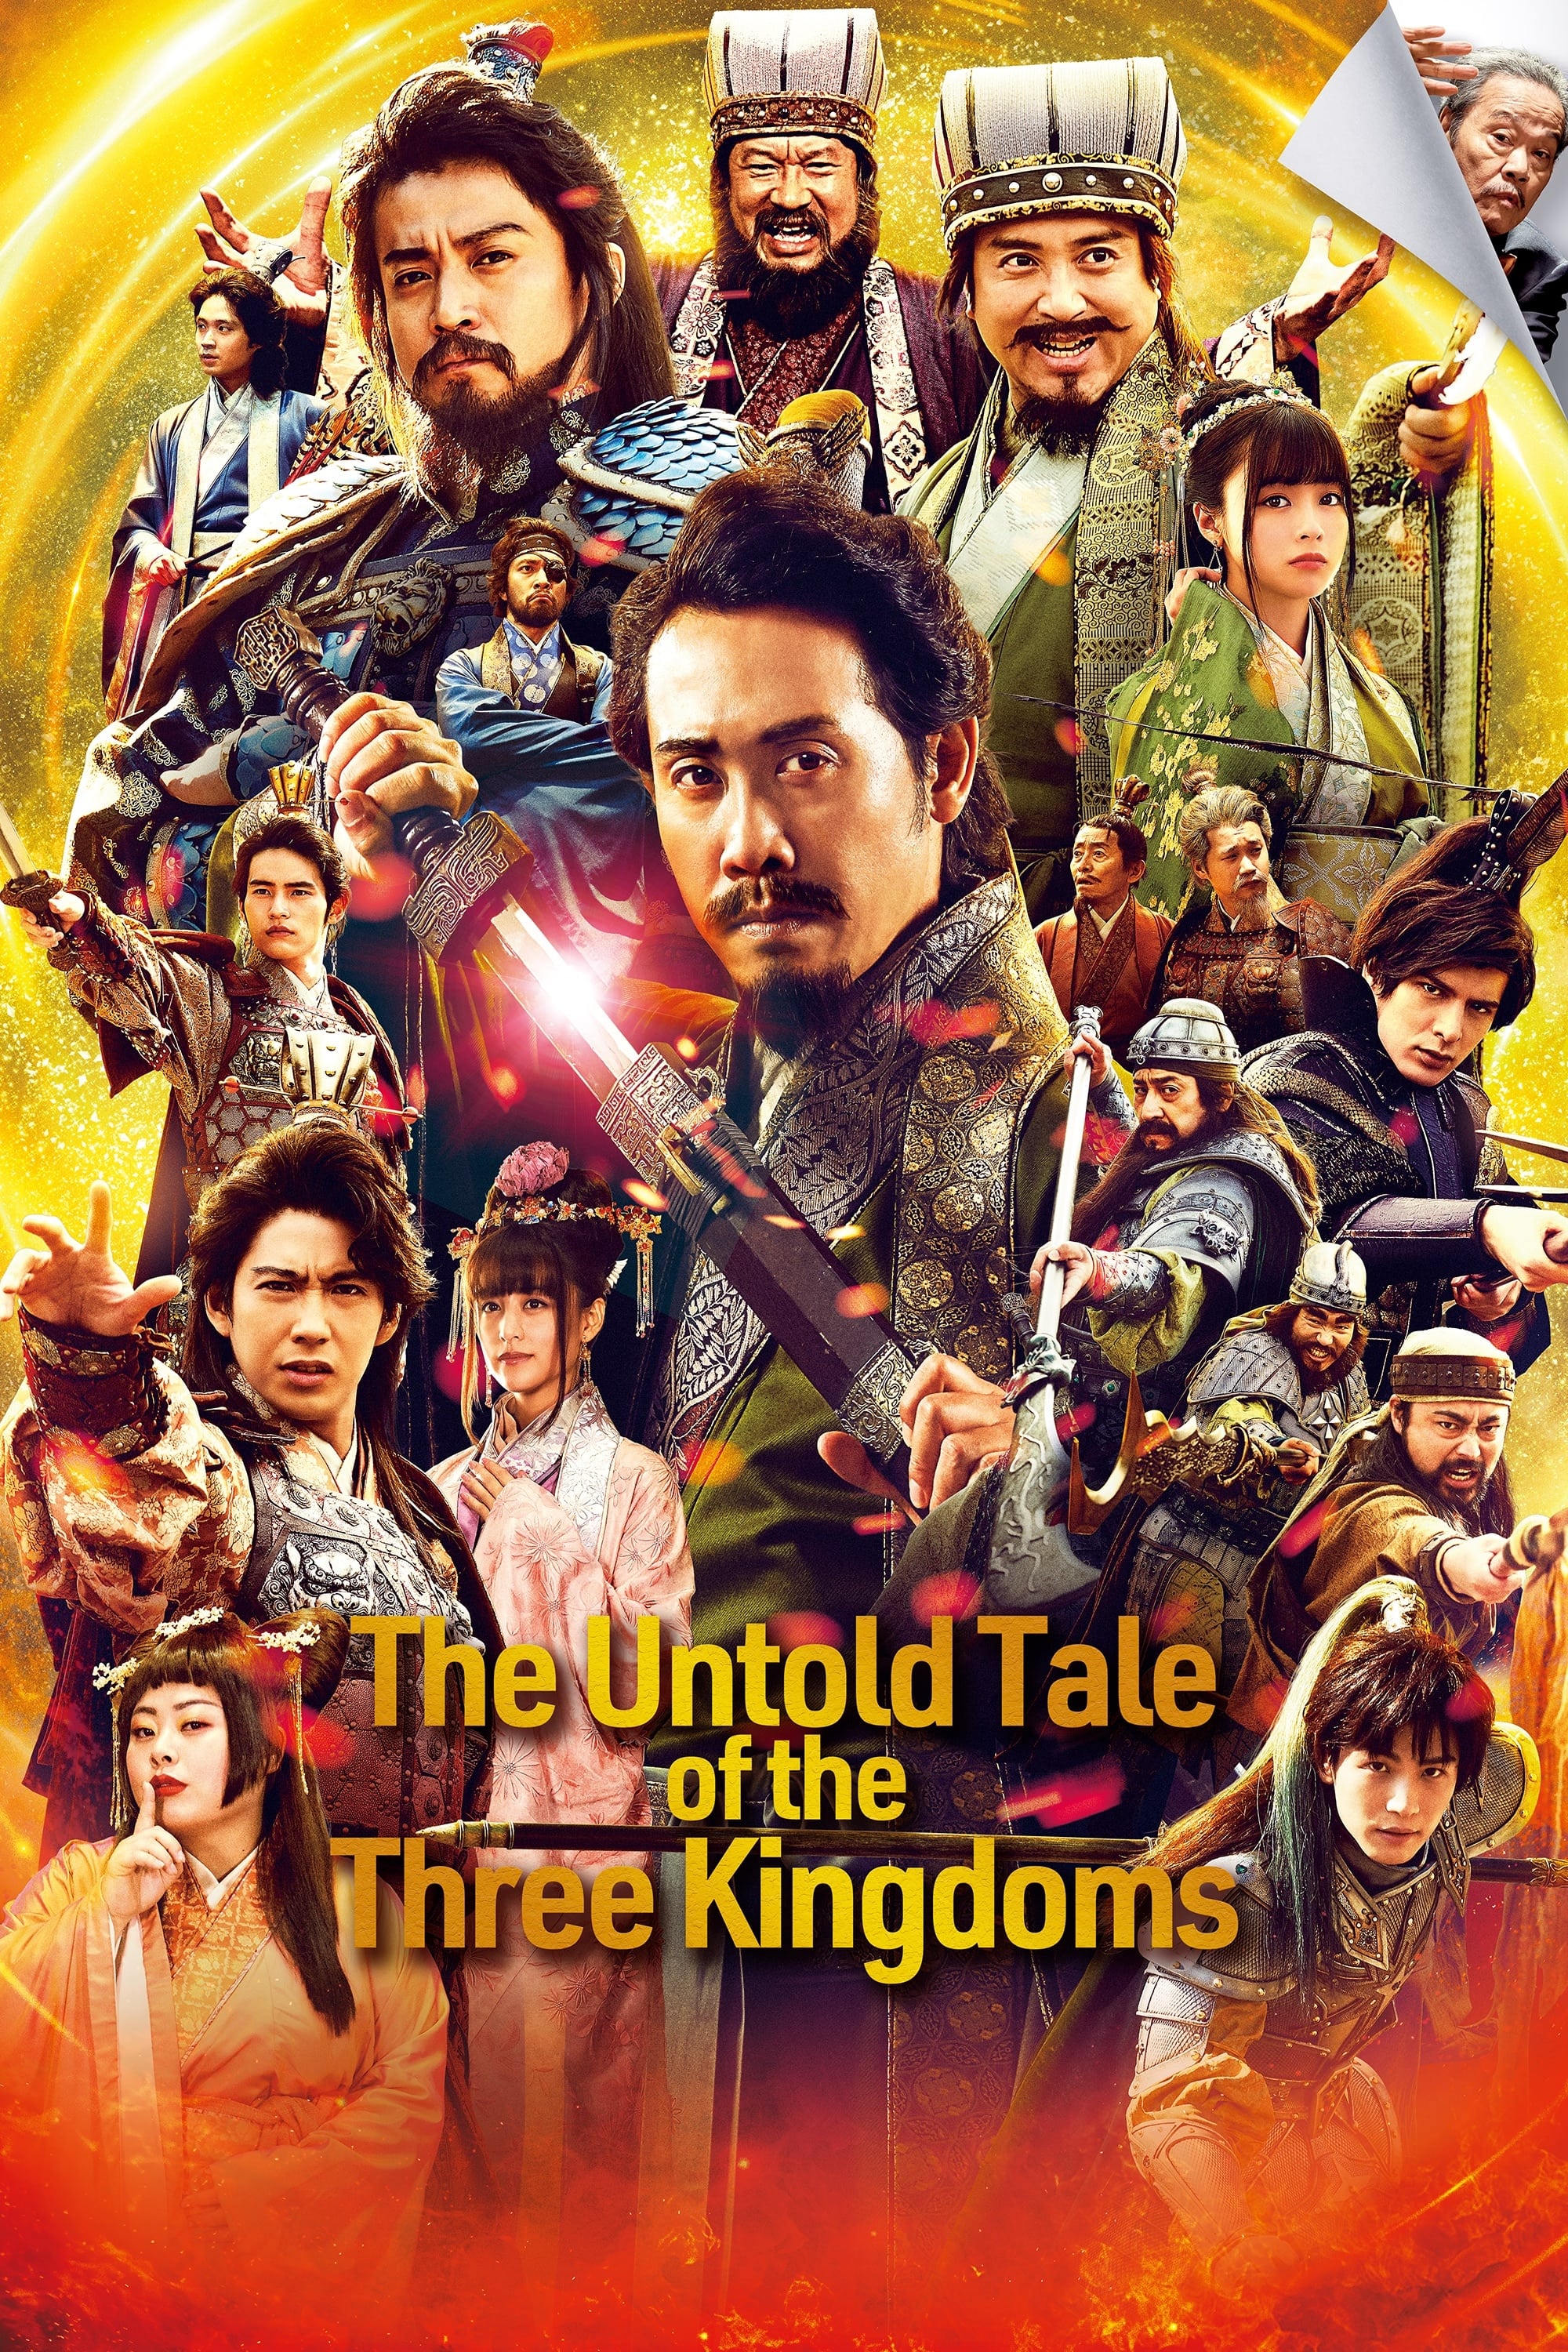 The Untold Tale of the Three Kingdoms (2020)